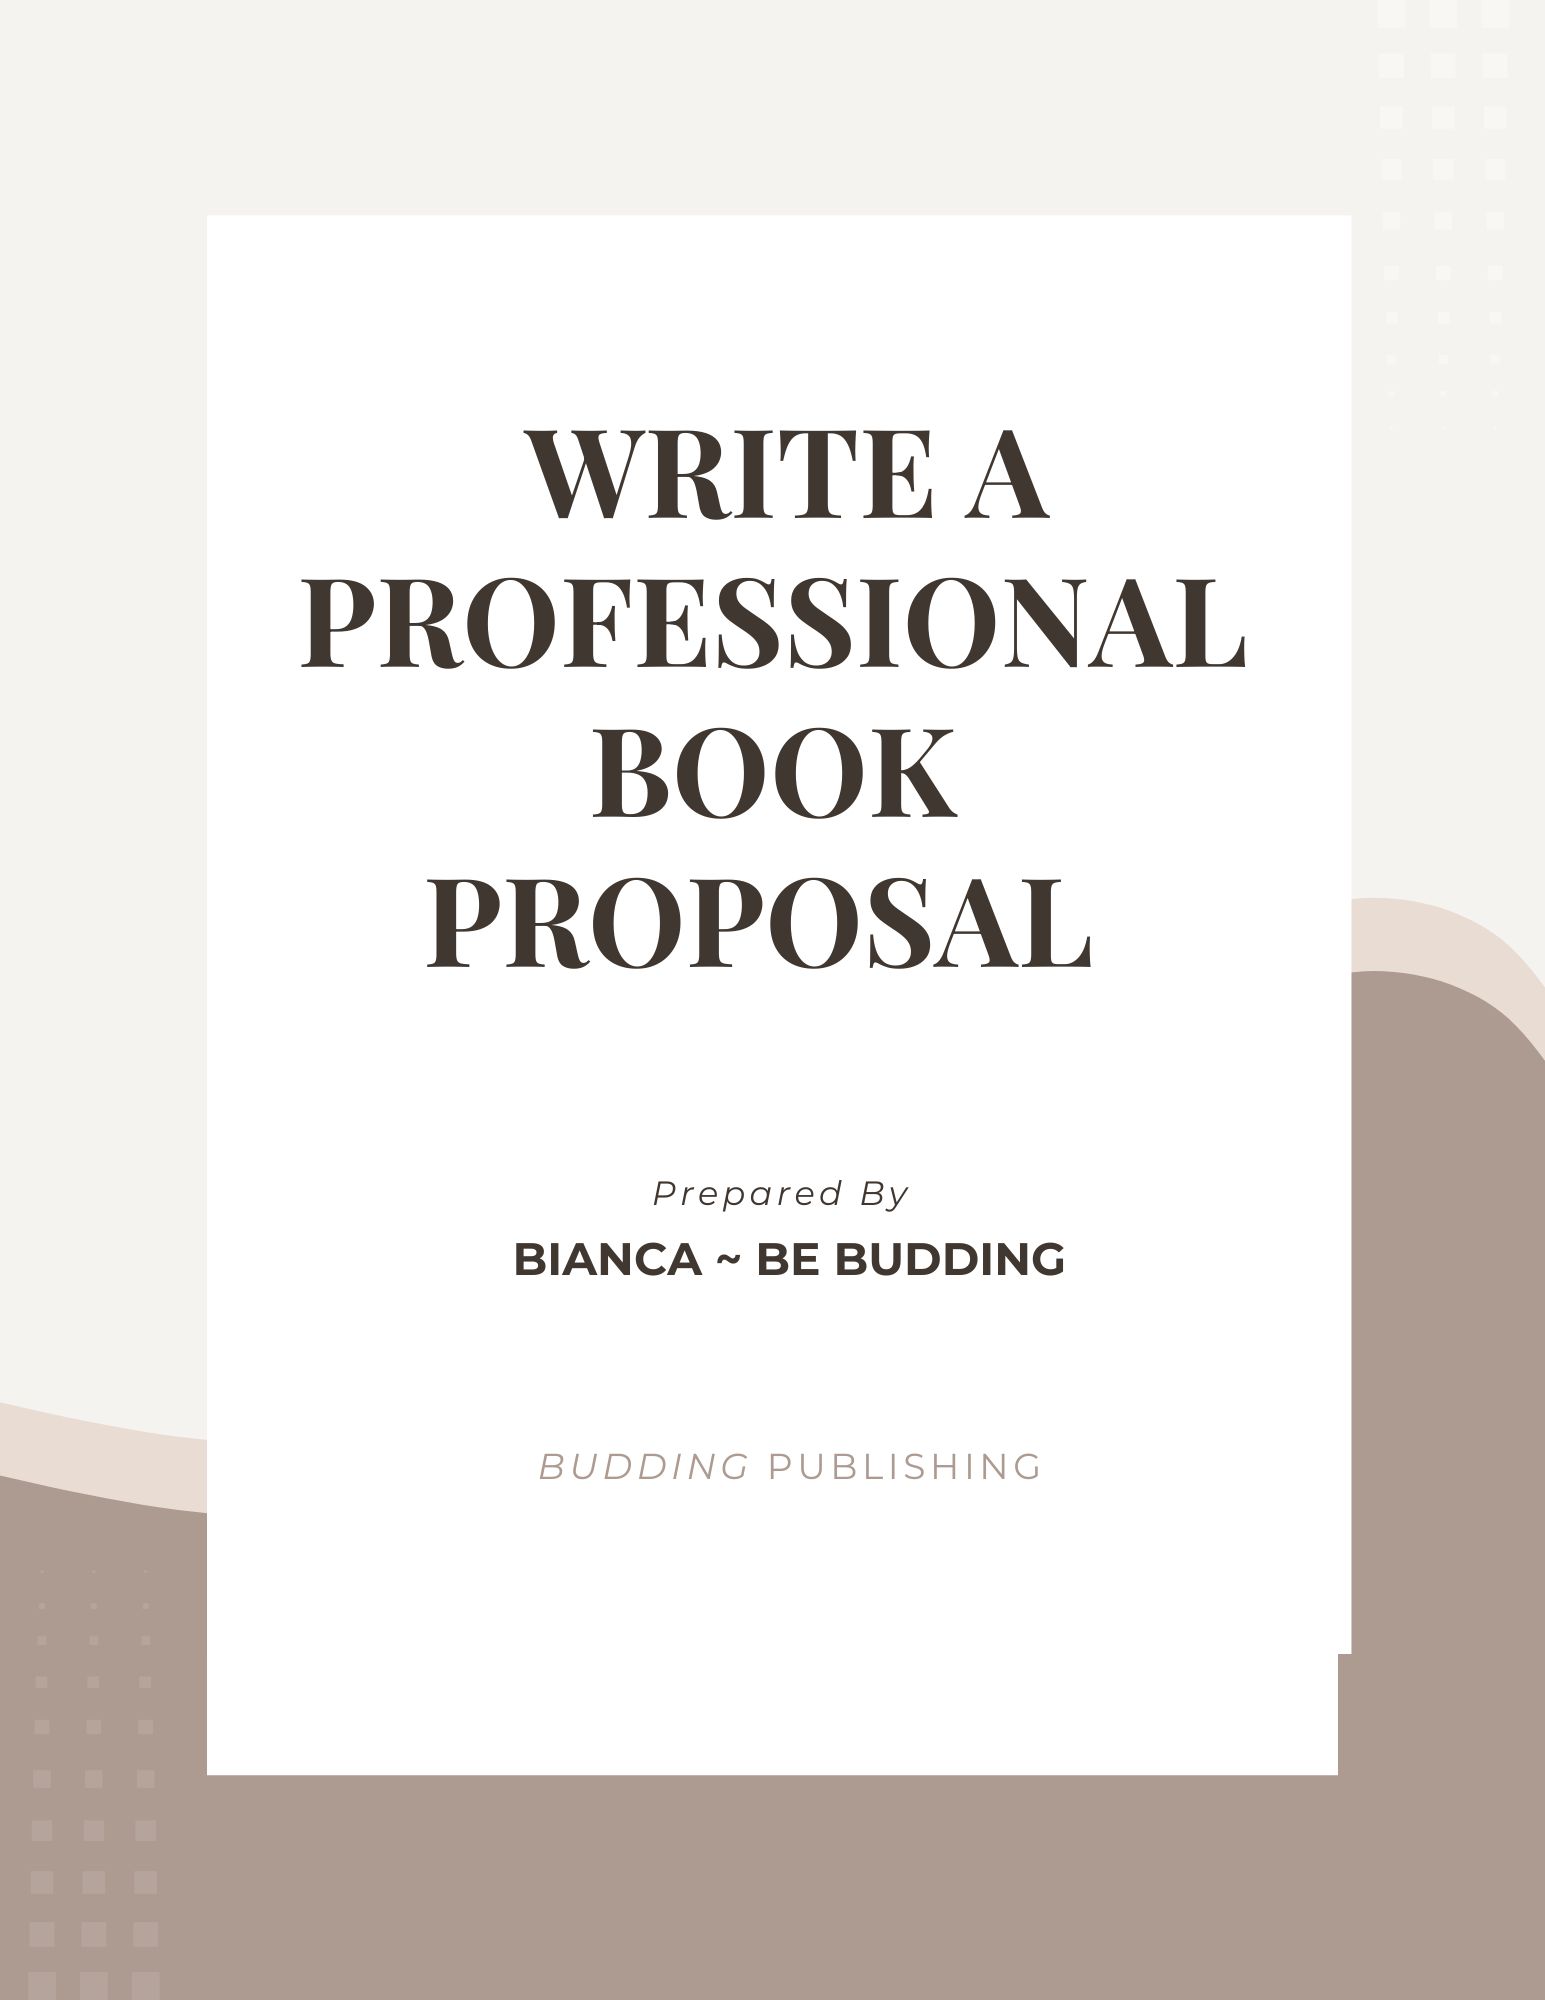 Craft a compelling book proposal that meets the standards of leading publishing houses like Hay House